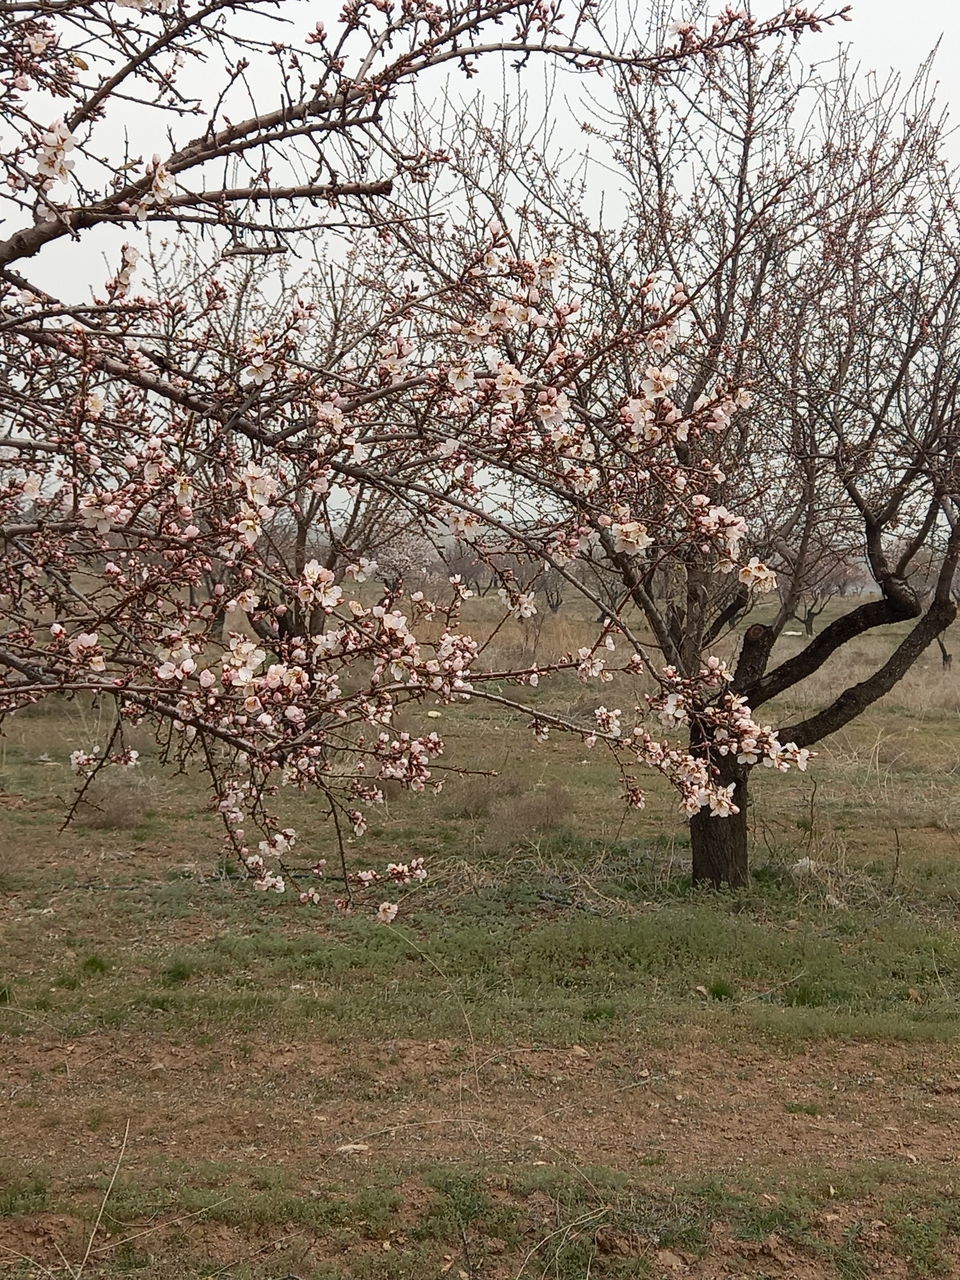 VIEW OF CHERRY BLOSSOM TREE